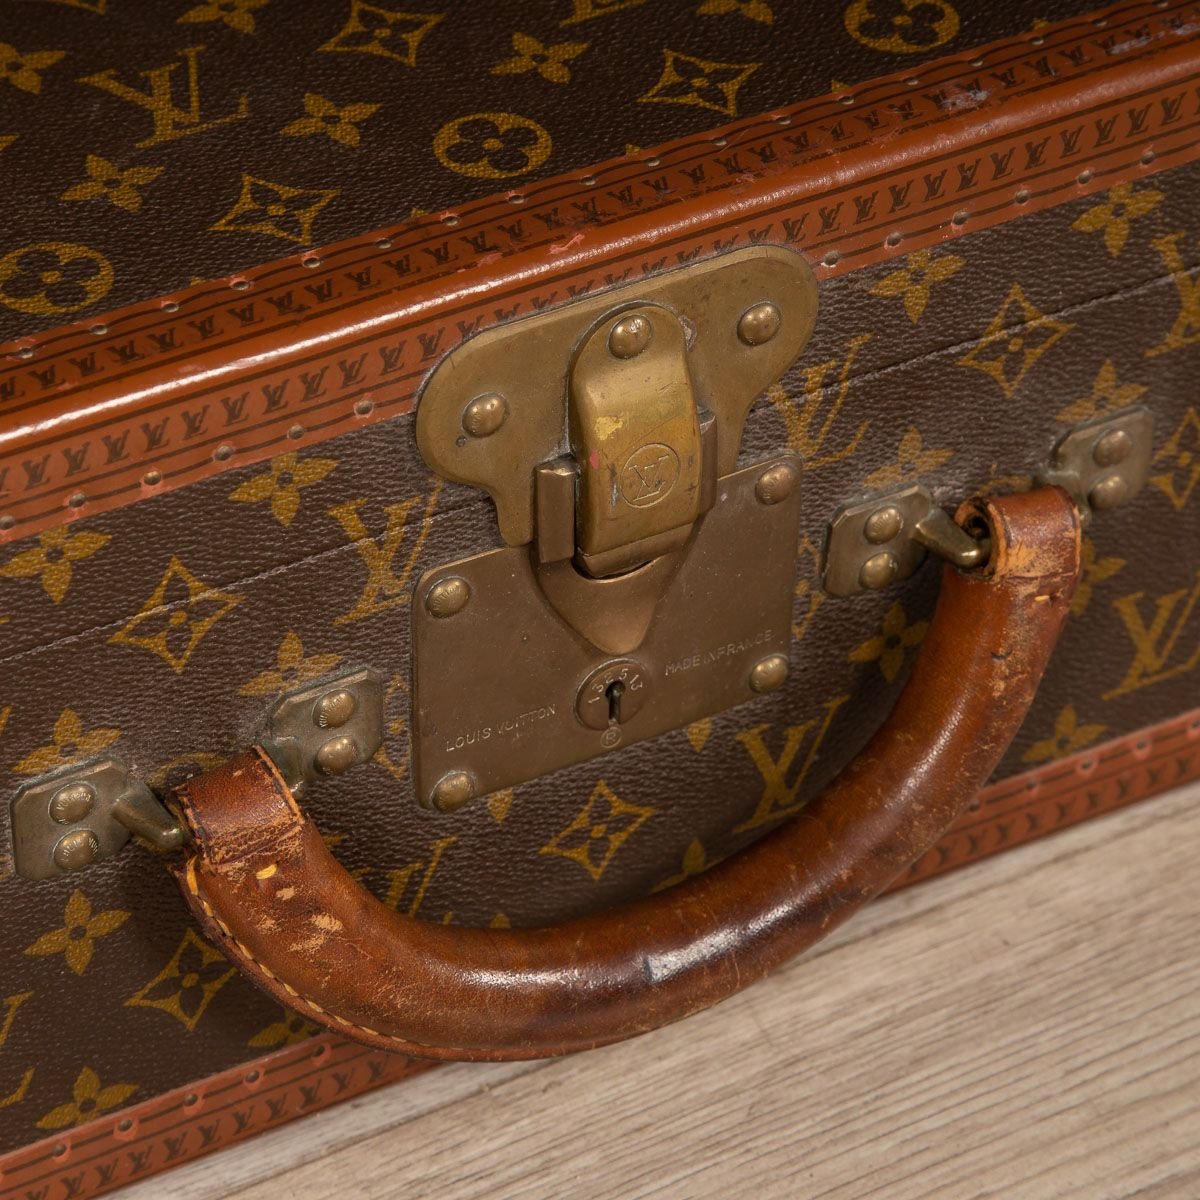 Vintage French Monogrammed Fabric Suitcase from Louis Vuitton, 1970s for sale at Pamono